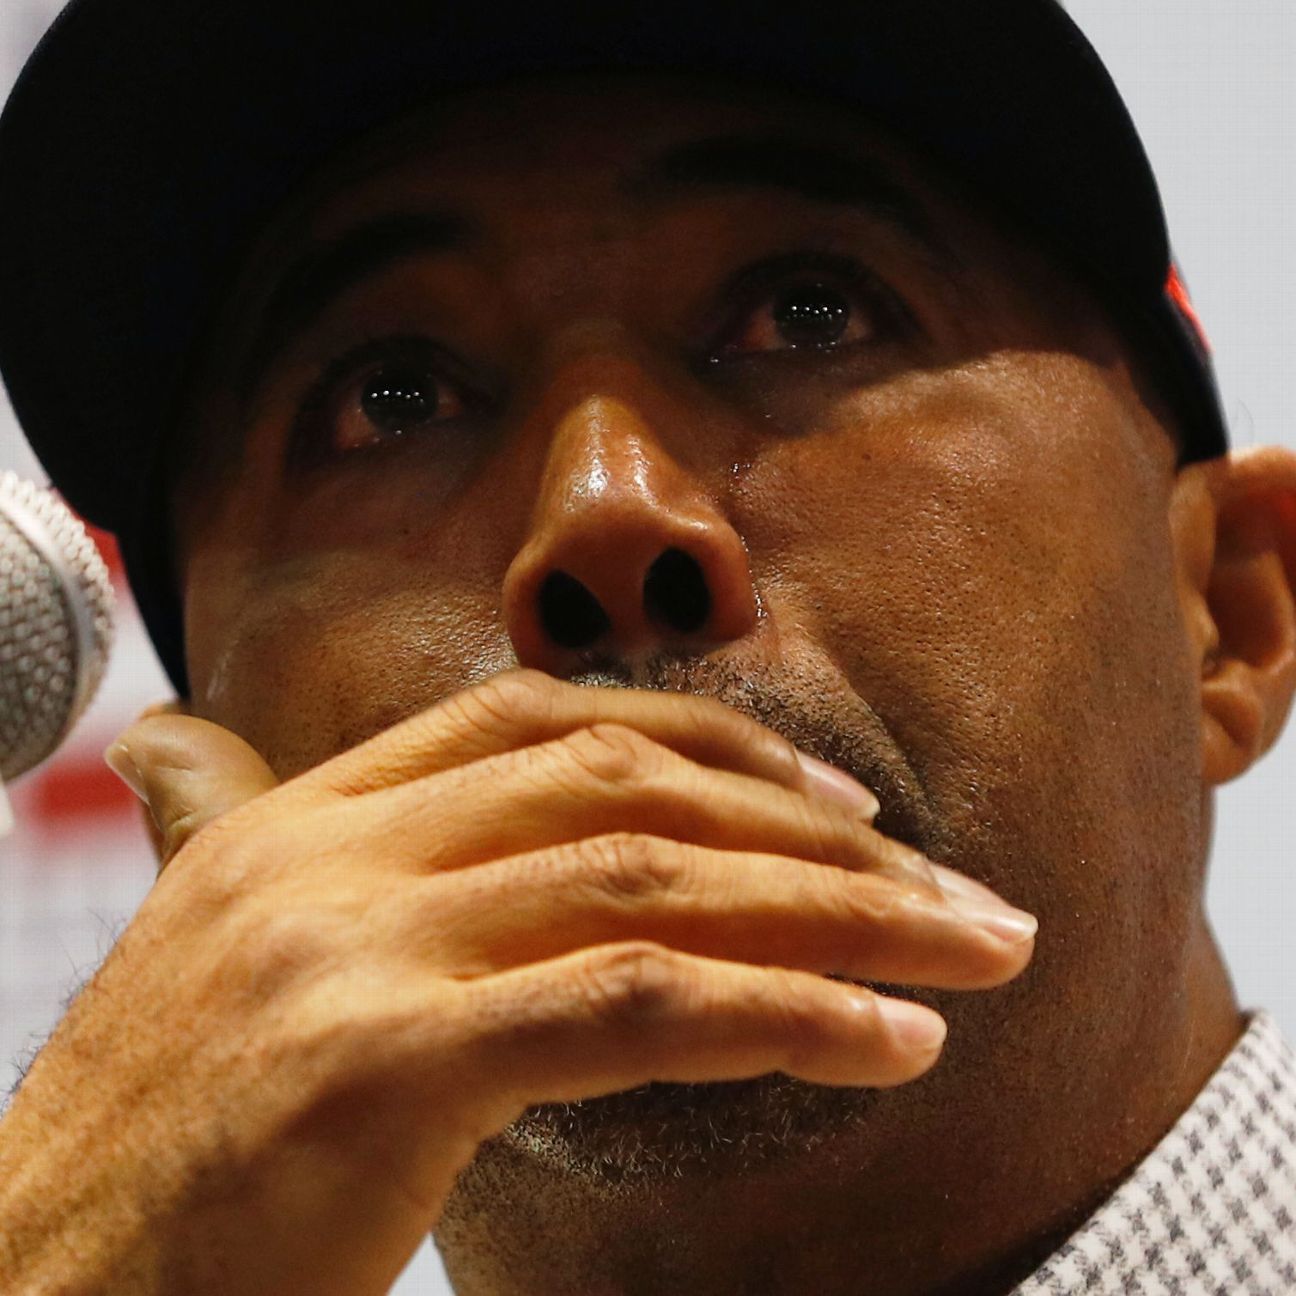 Harold Baines, who let his performance do the talking for much of his  career, gets the last word